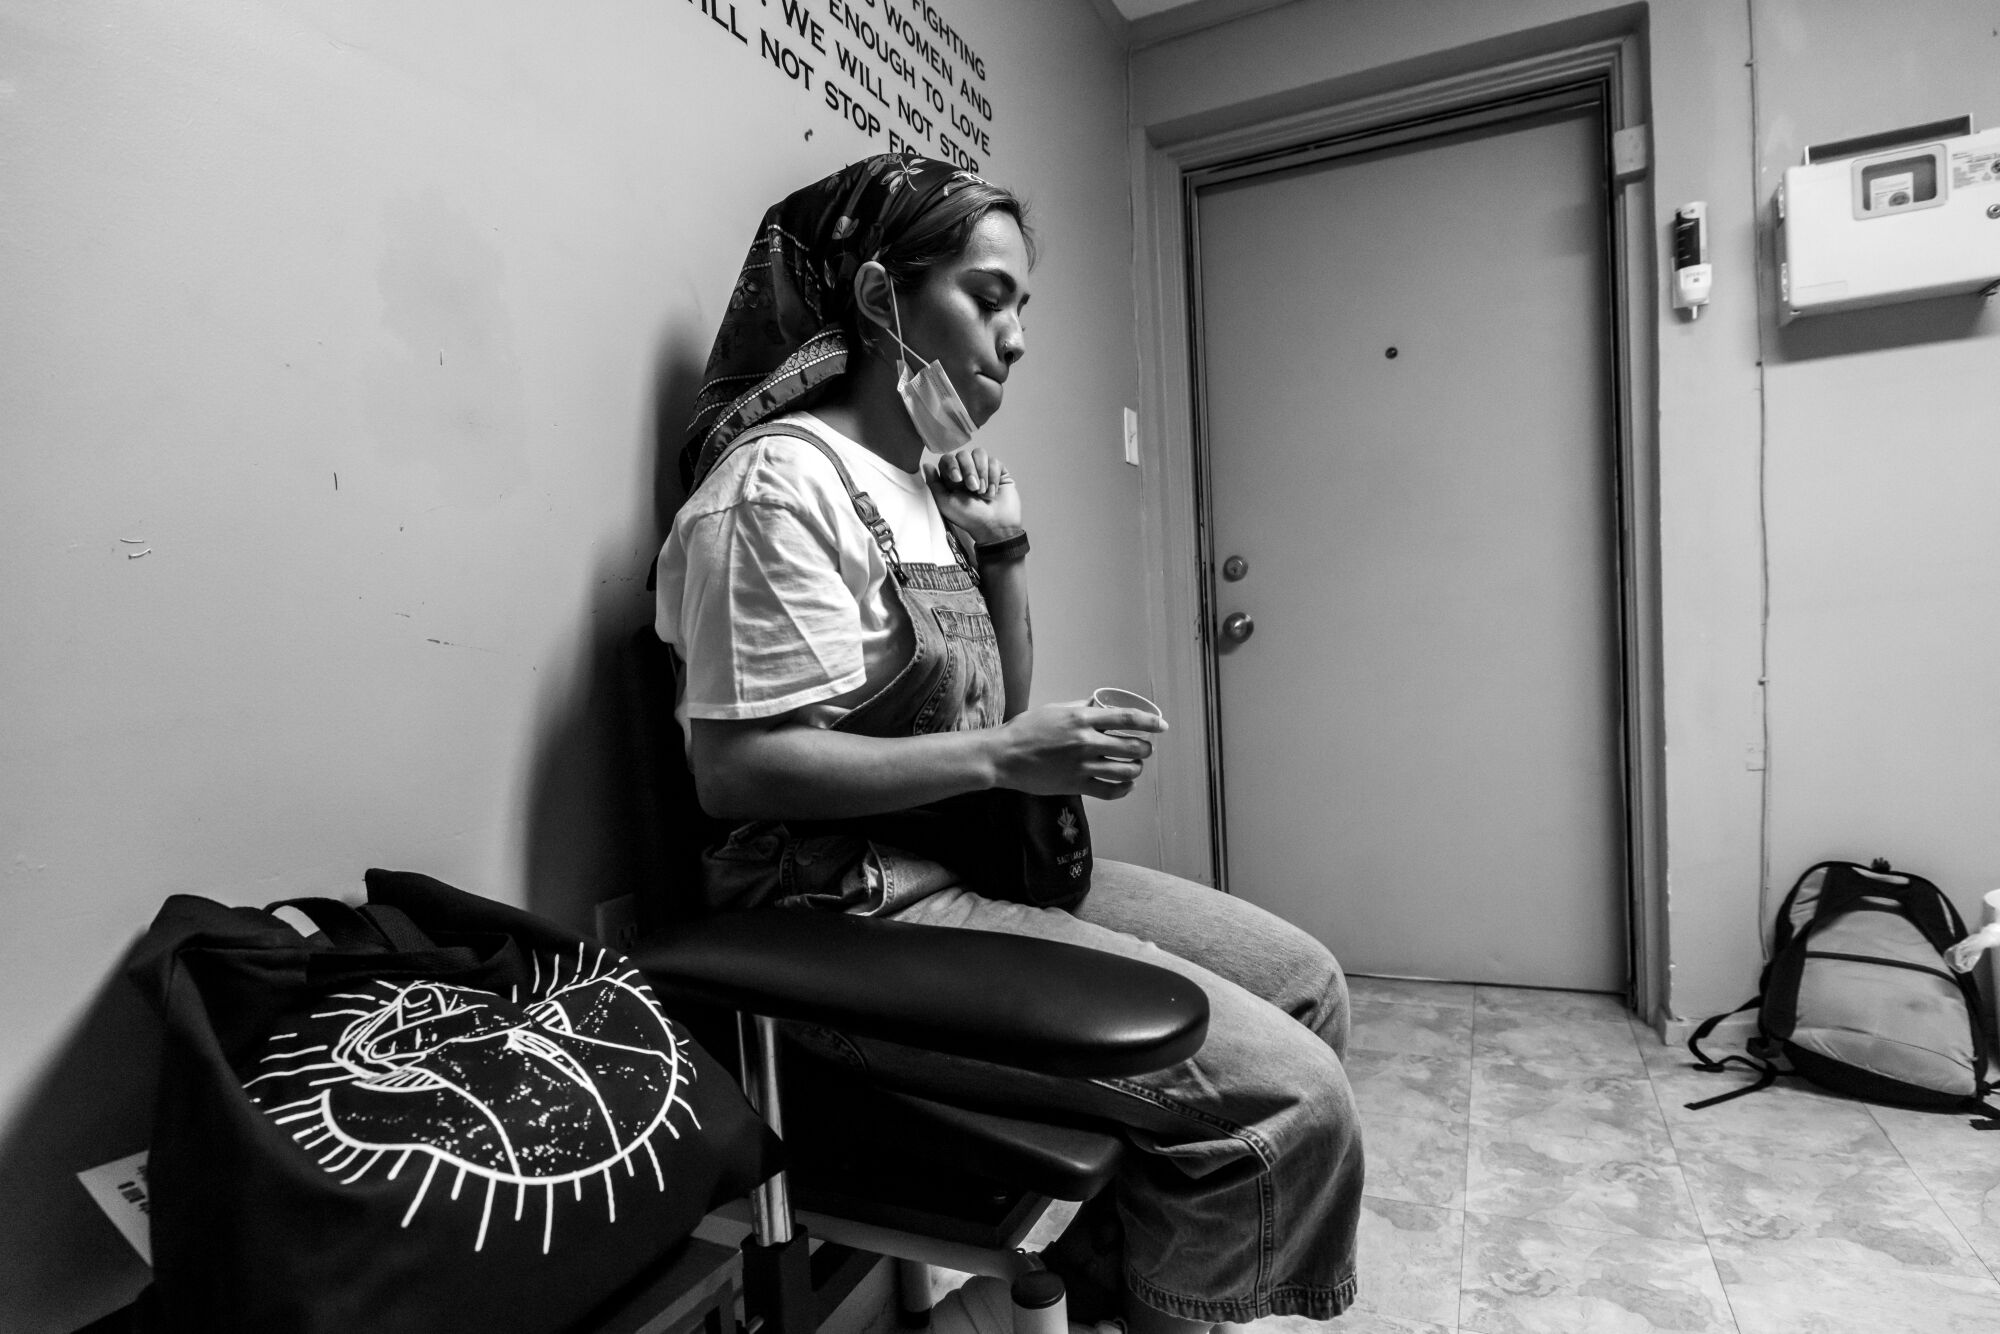 A woman sits in a chair against a wall in an exam room